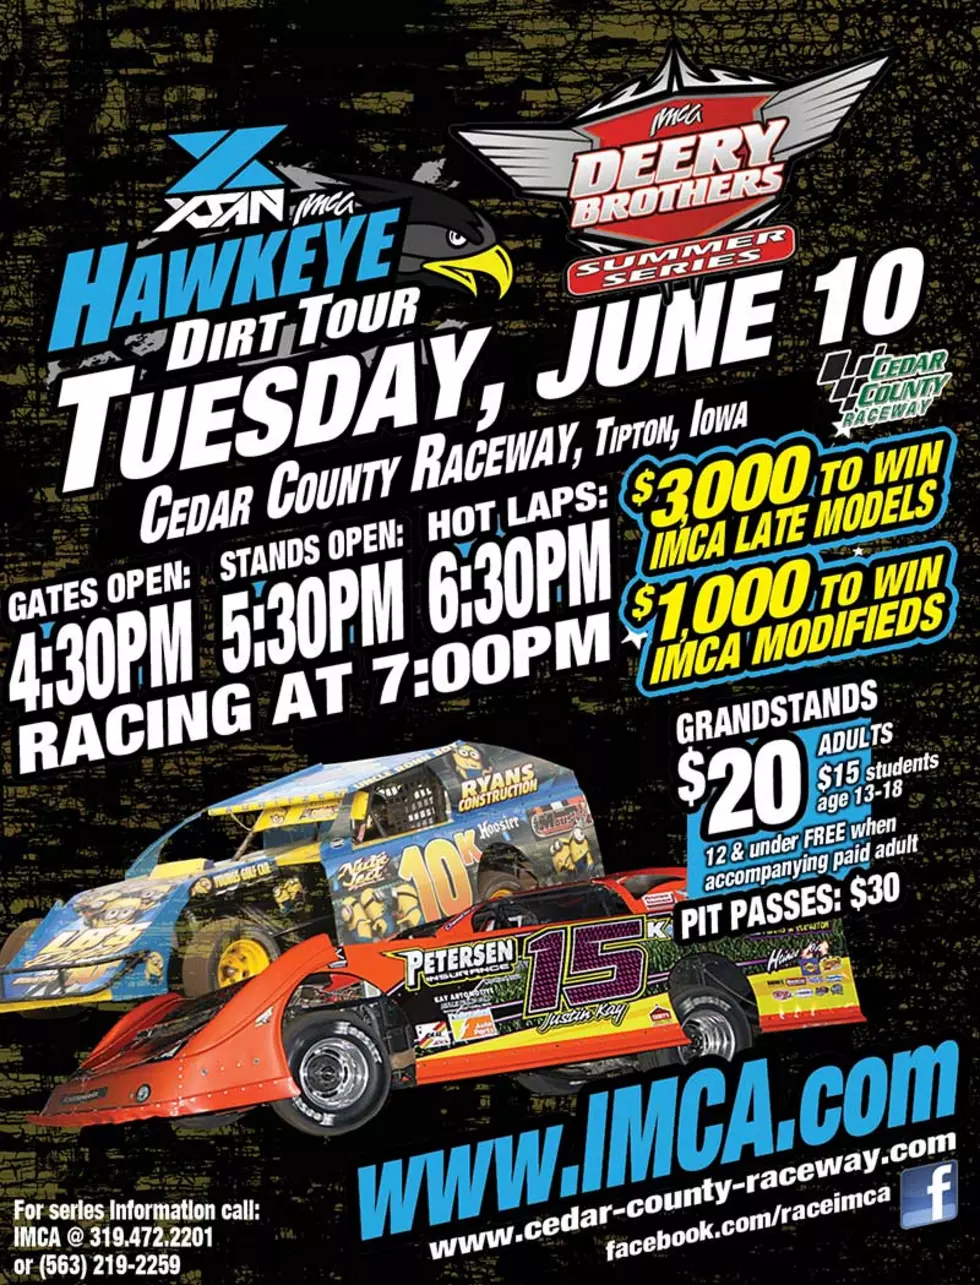 Big Night of Racing on the little 1/4 mile